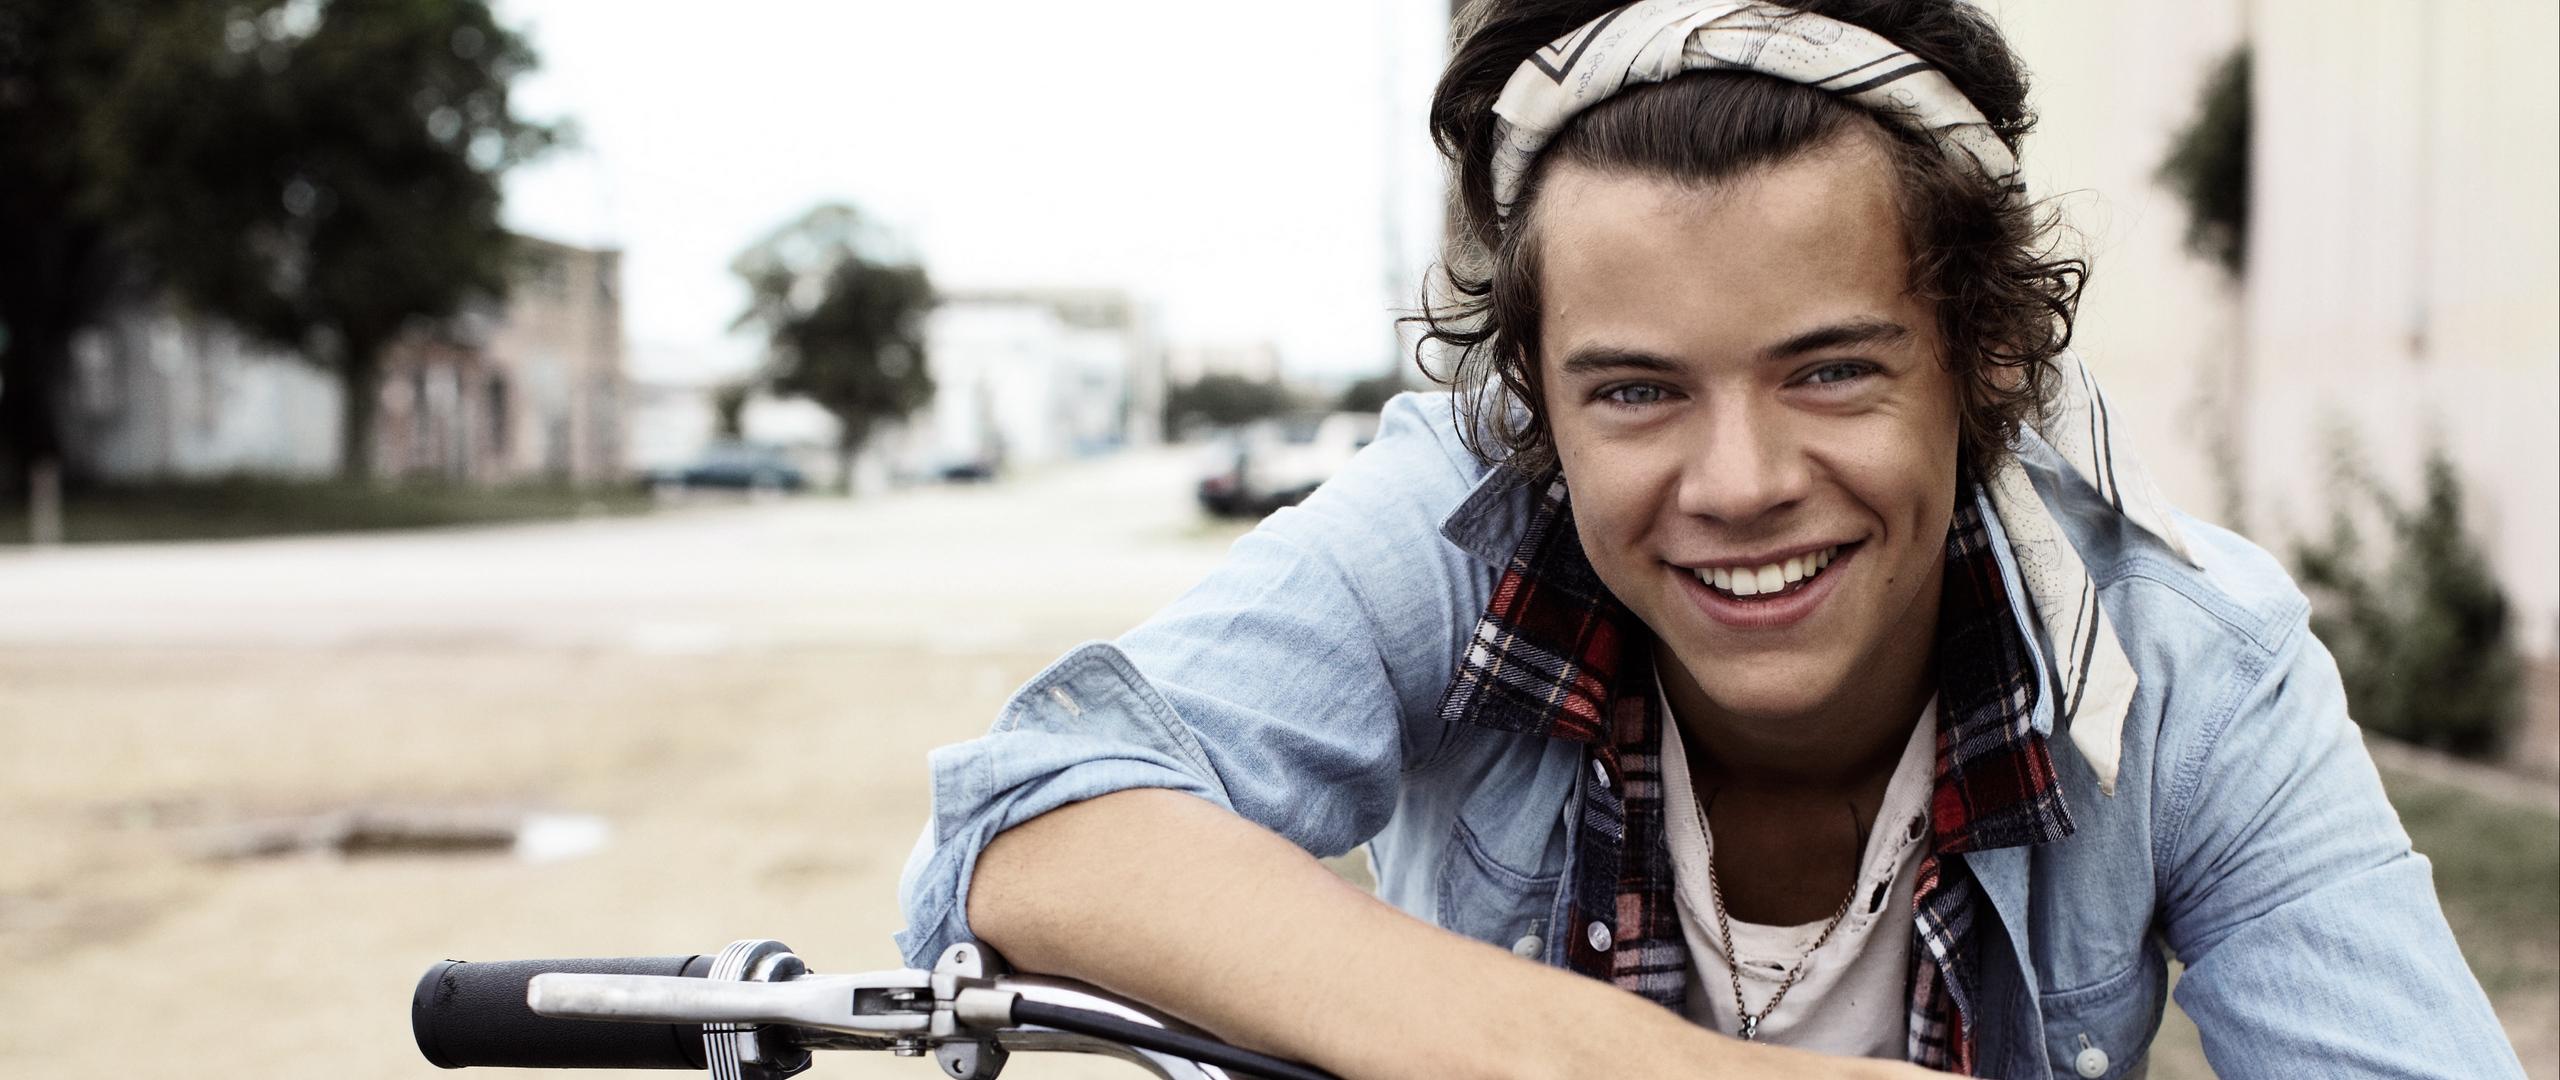 Download wallpaper 2560x1080 one direction, 1d, harry styles